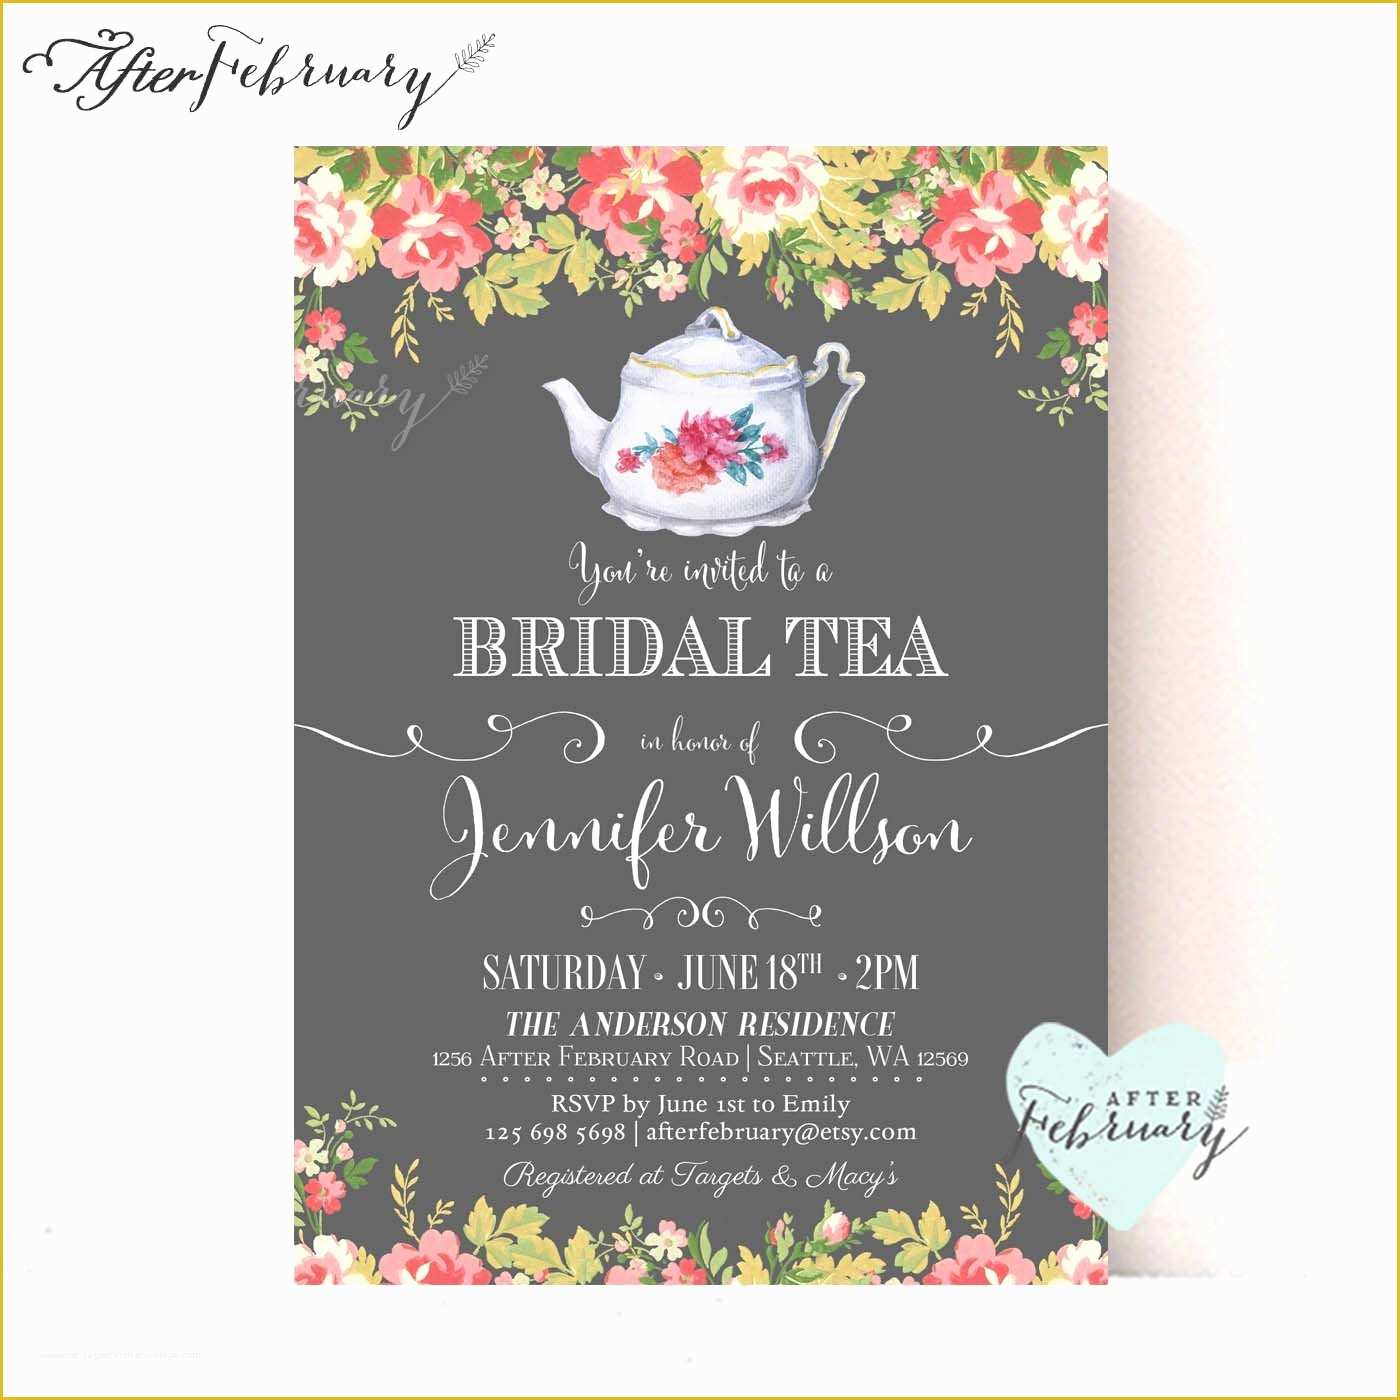 Free Bridal Shower Invitation Templates for Word Of Bridal Shower Invite Bridal Shower Invite Wording Card